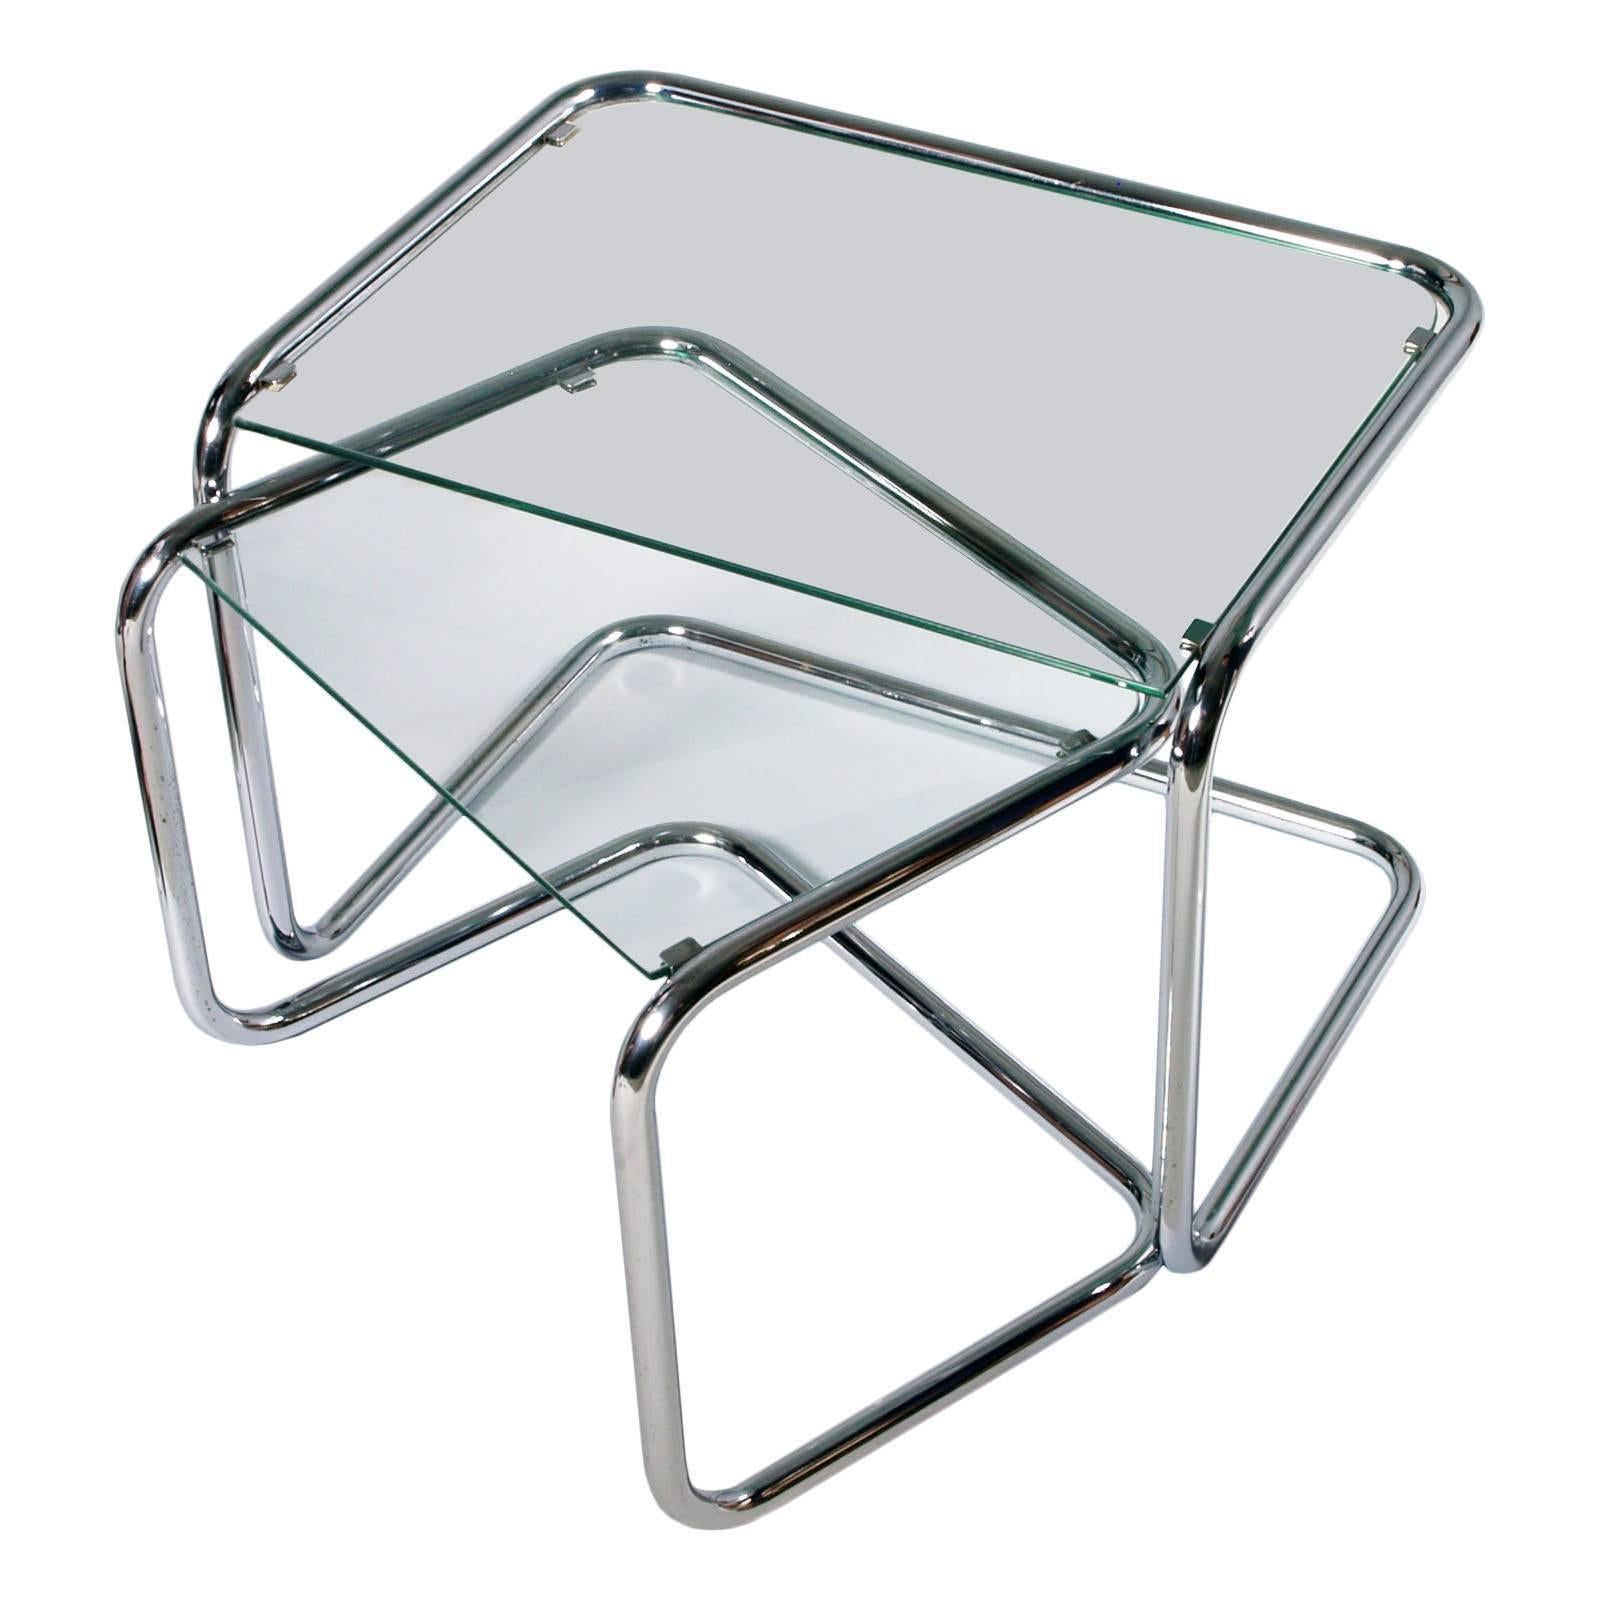 1960s, Mid-Century Modern Crystal and Chrome Nesting Tables Milo Baughman Style For Sale